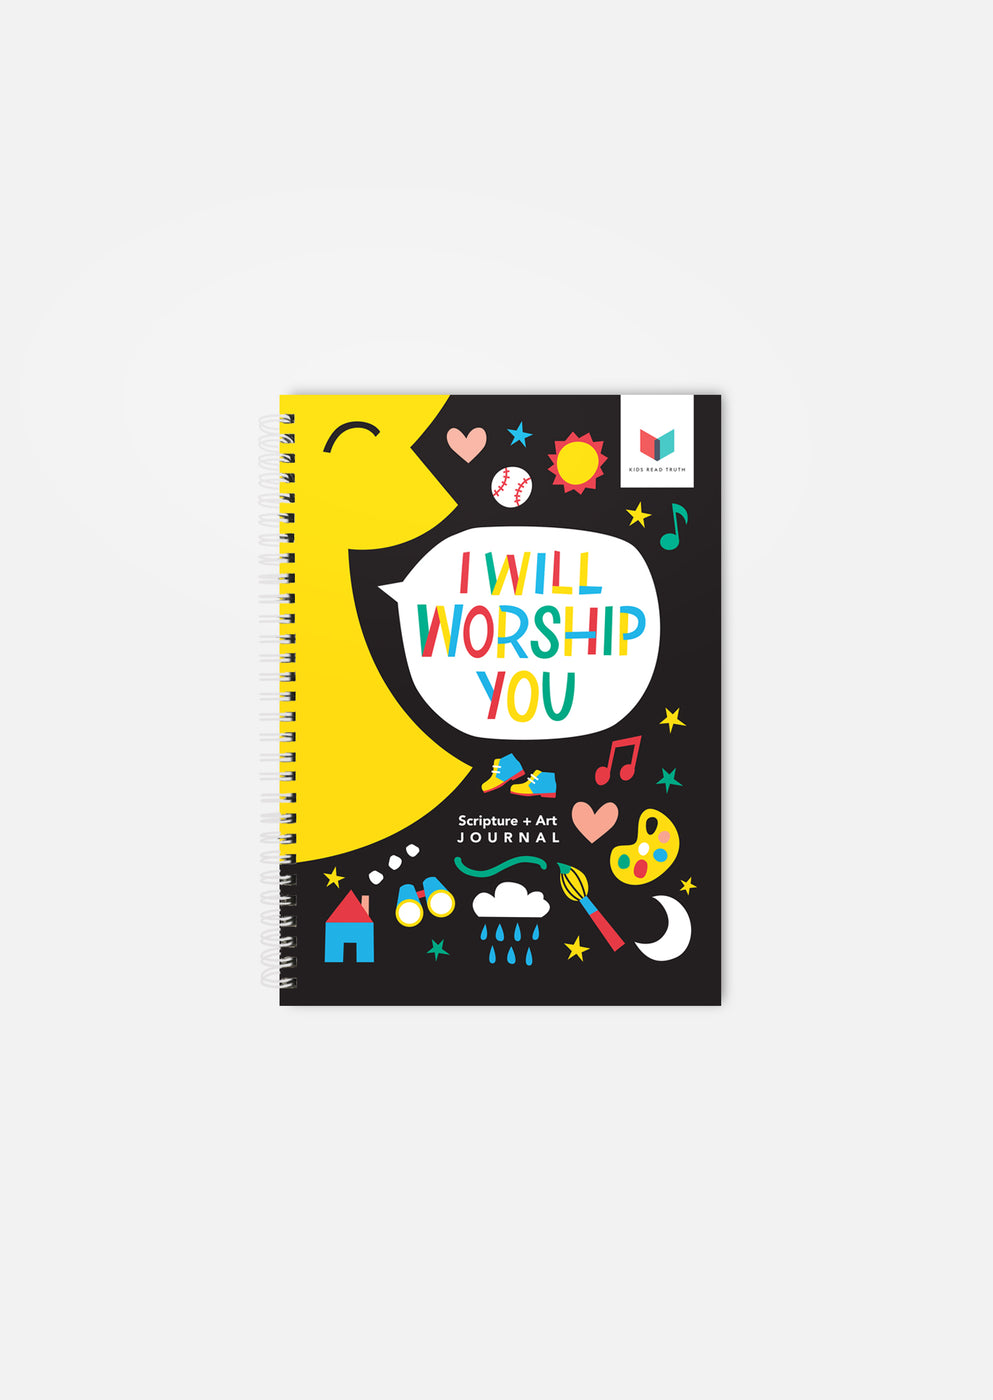 Summer Draw and Write Journal For Kids: My New Summer Desgin Notebook For  Kids. Summer Writing and drawing Notebook for kids age. Drawing Journl and